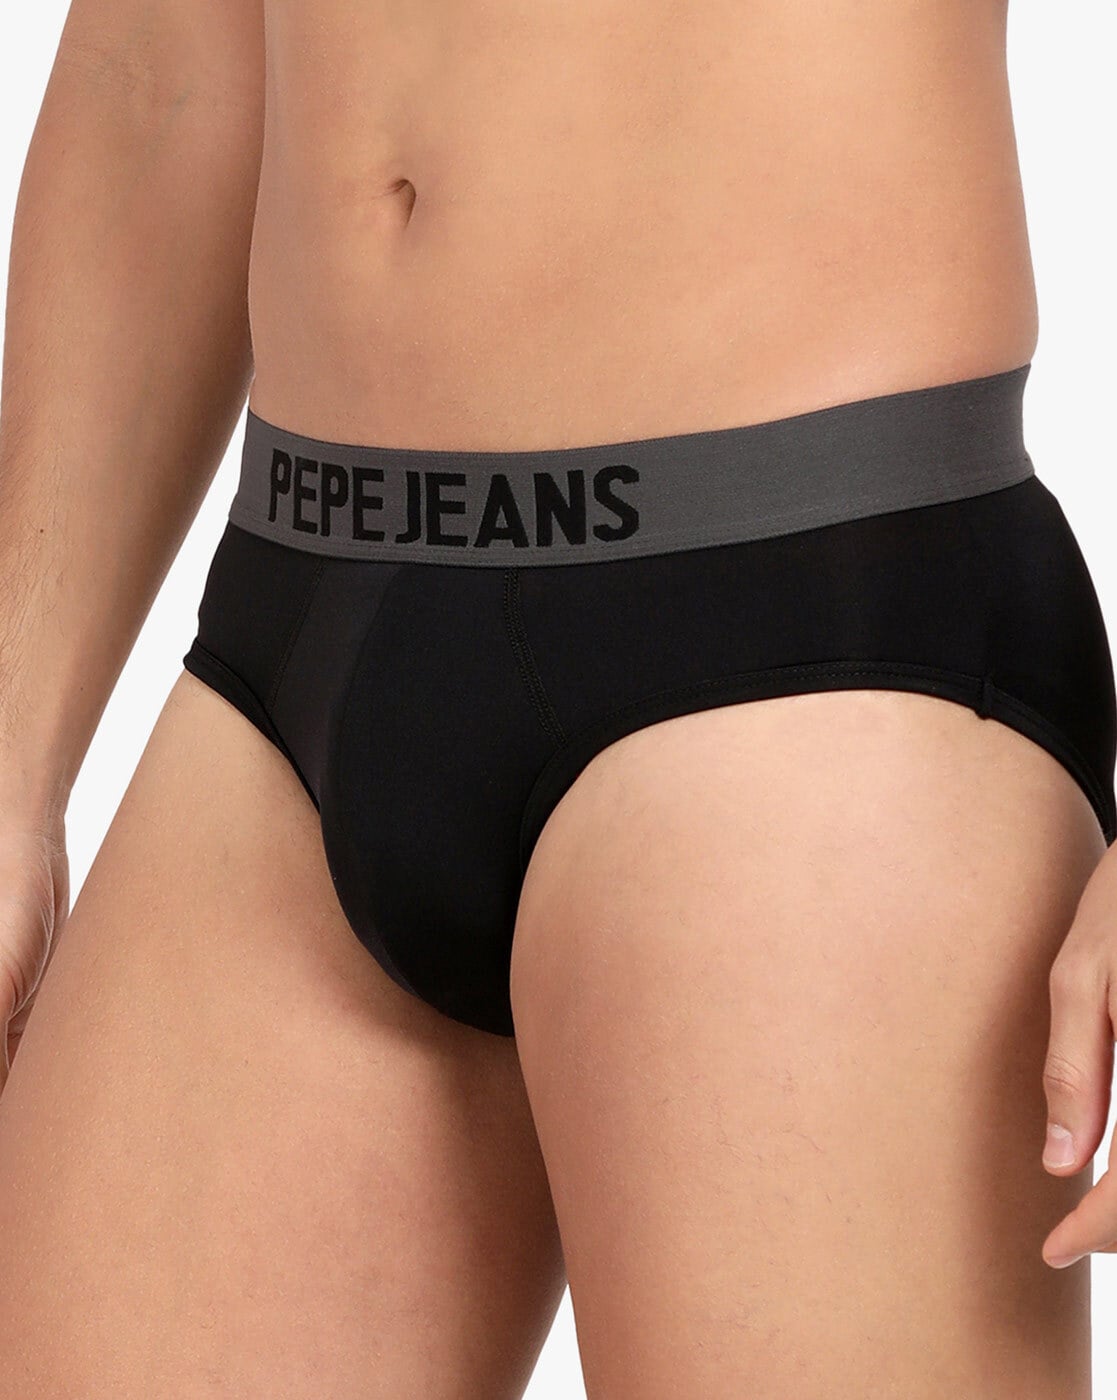 Buy Pepe Jeans Men's Nylon Classic Solid Briefs (Pack of 1